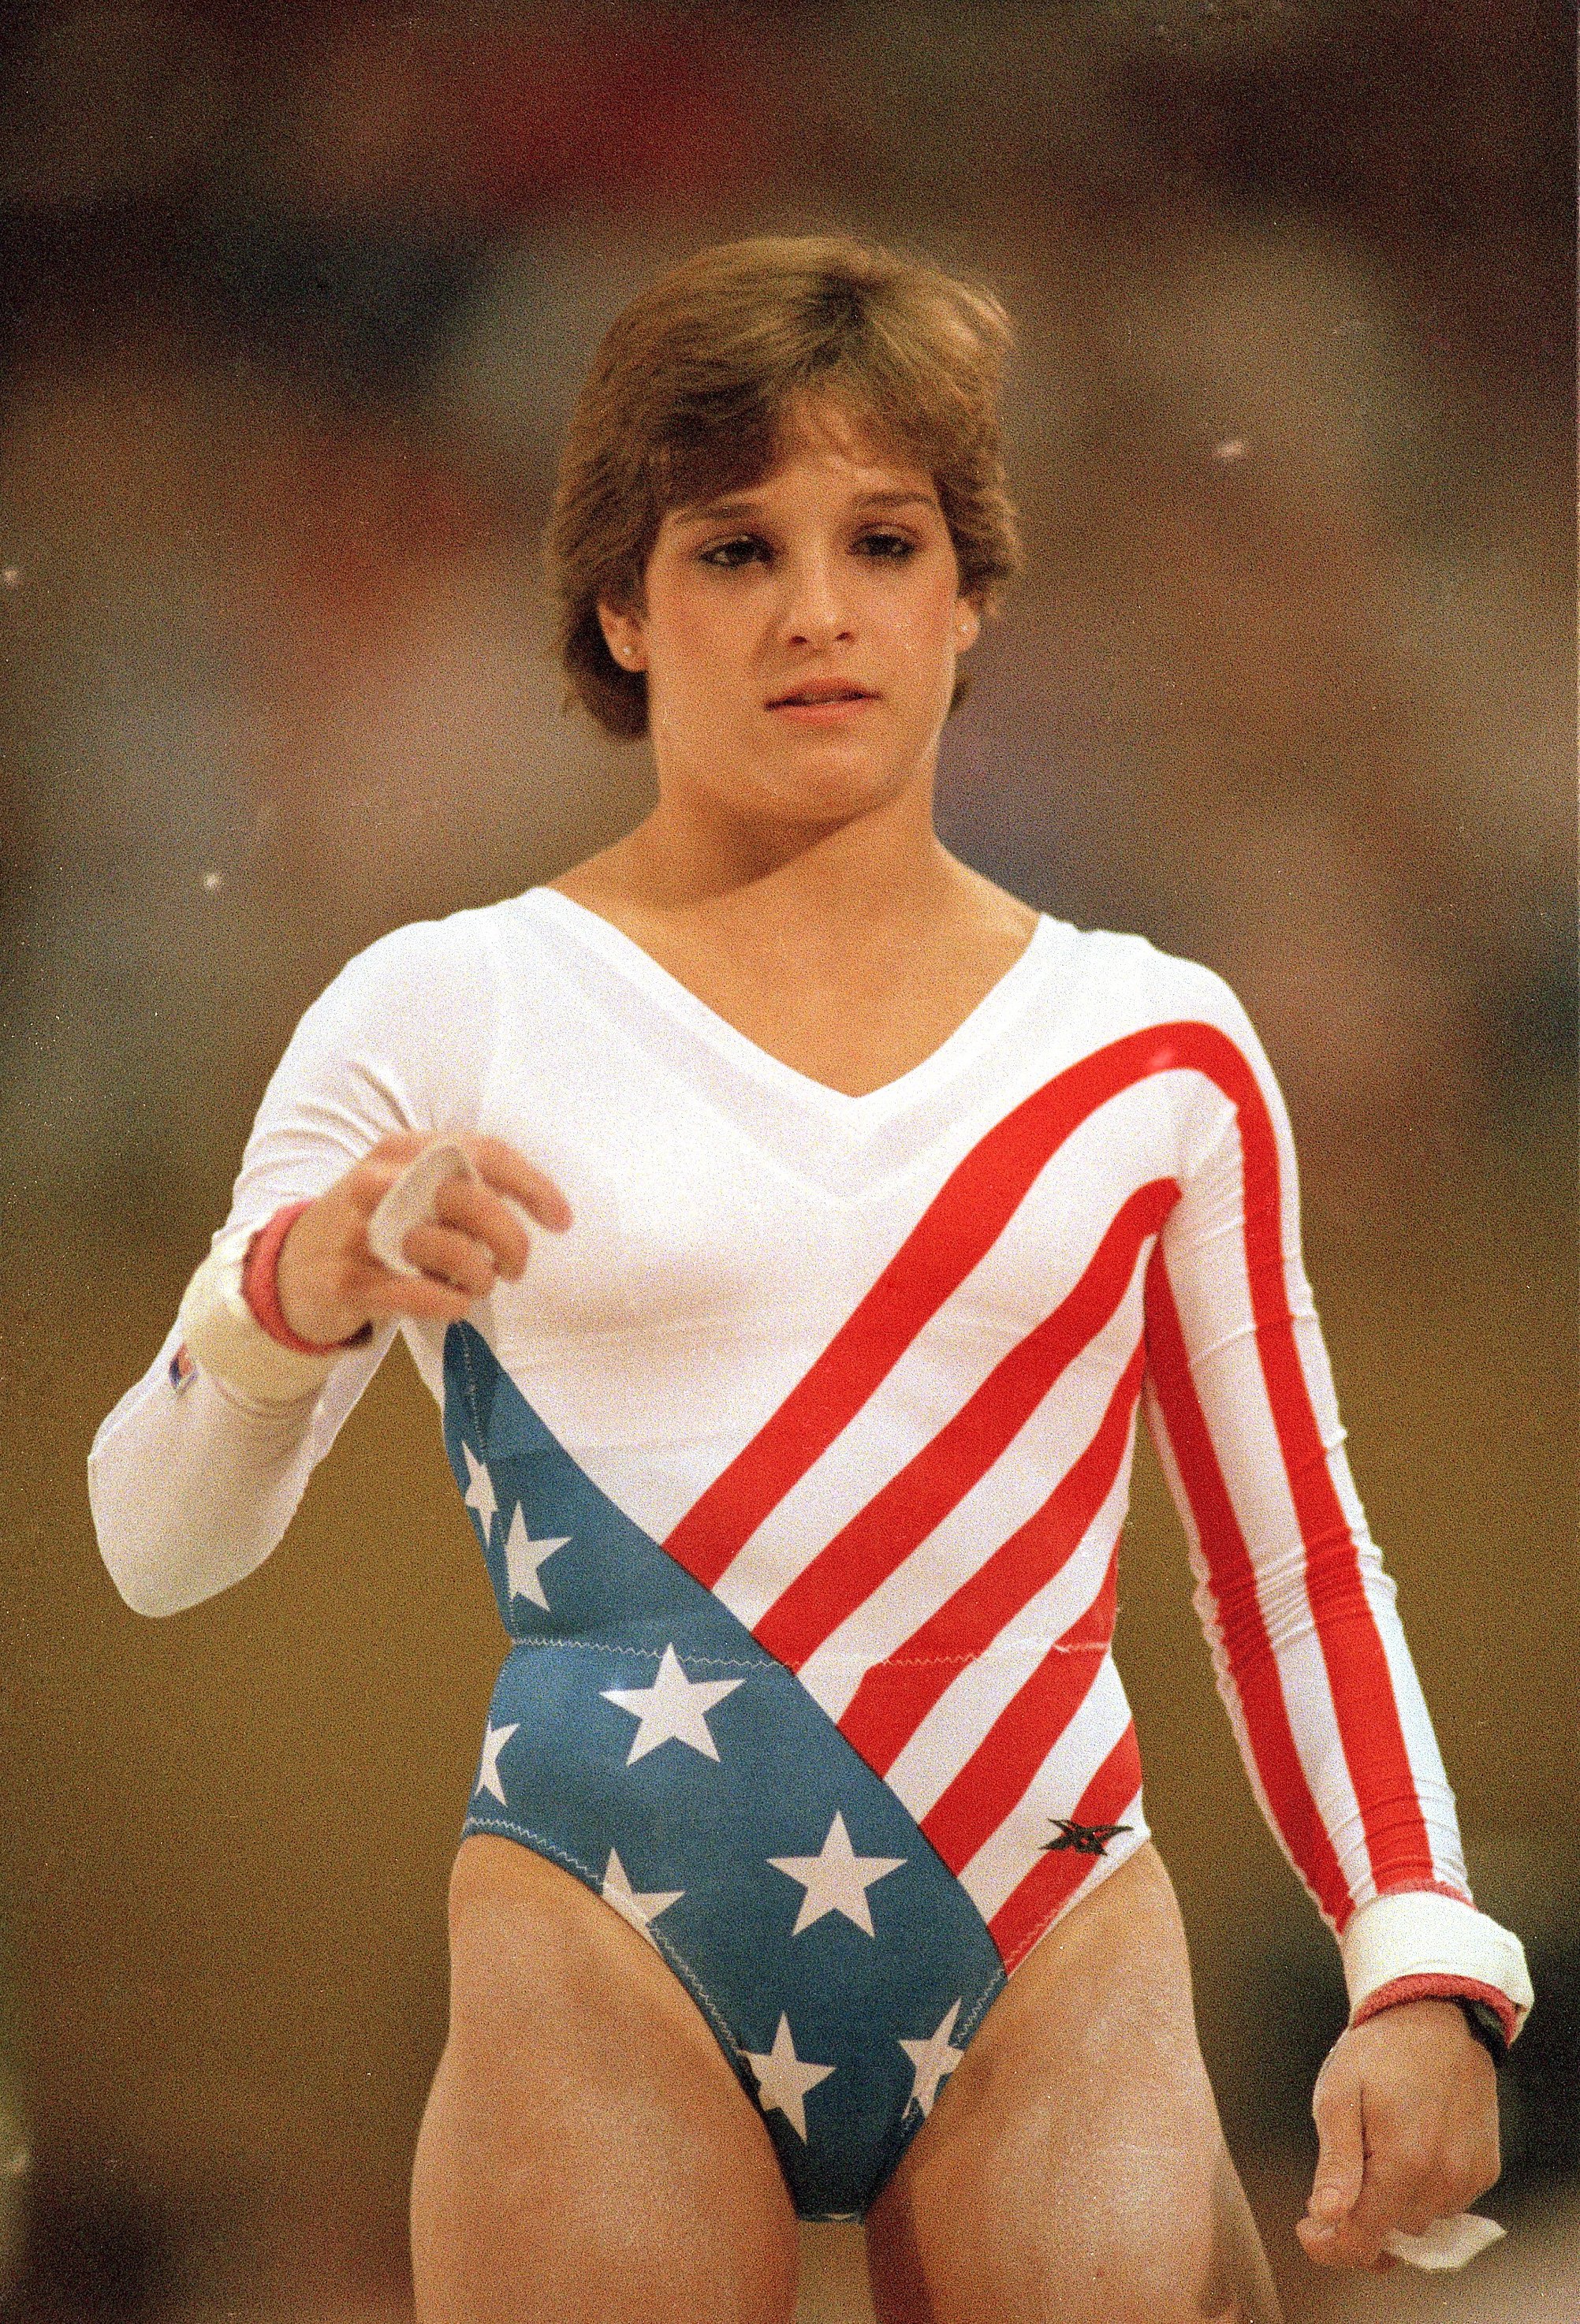 Mary Lou Retton during the 1984 Summer Olympics in Los Angeles, California | Source: Getty Images